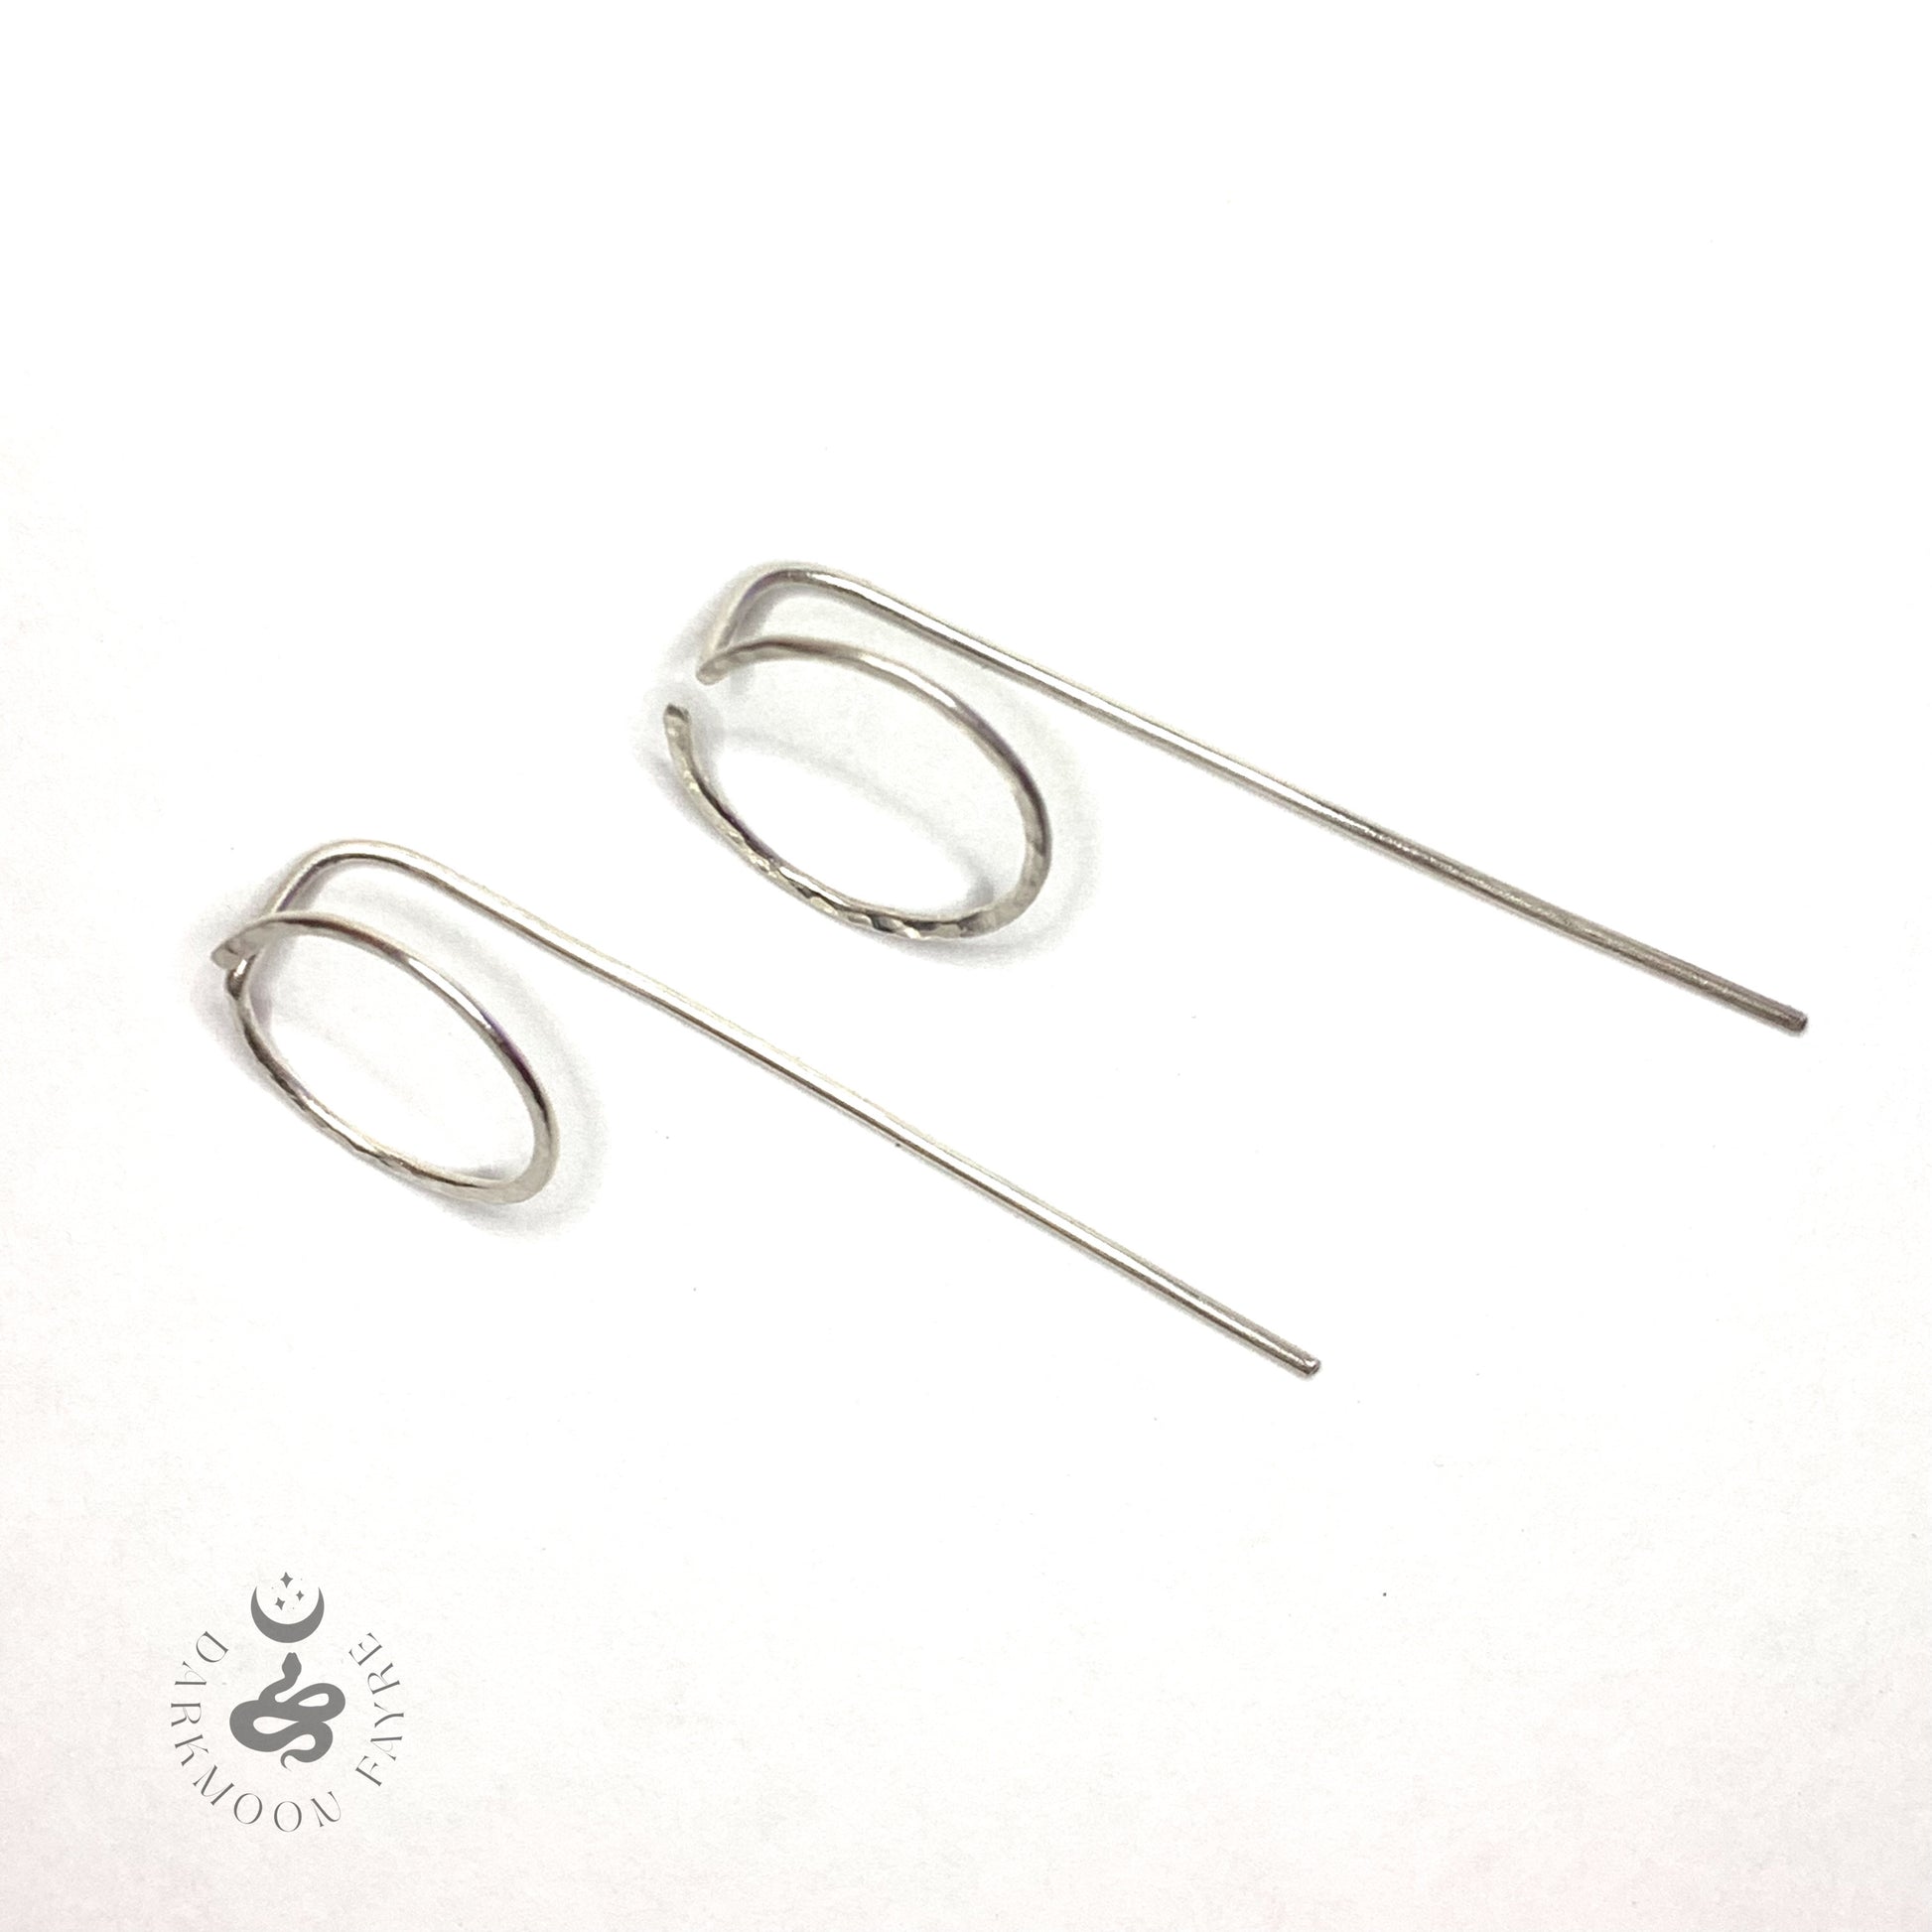 Hammer Textured Hand Forged Open Circle Earrings In 925 Sterling Silver - Darkmoon Fayre